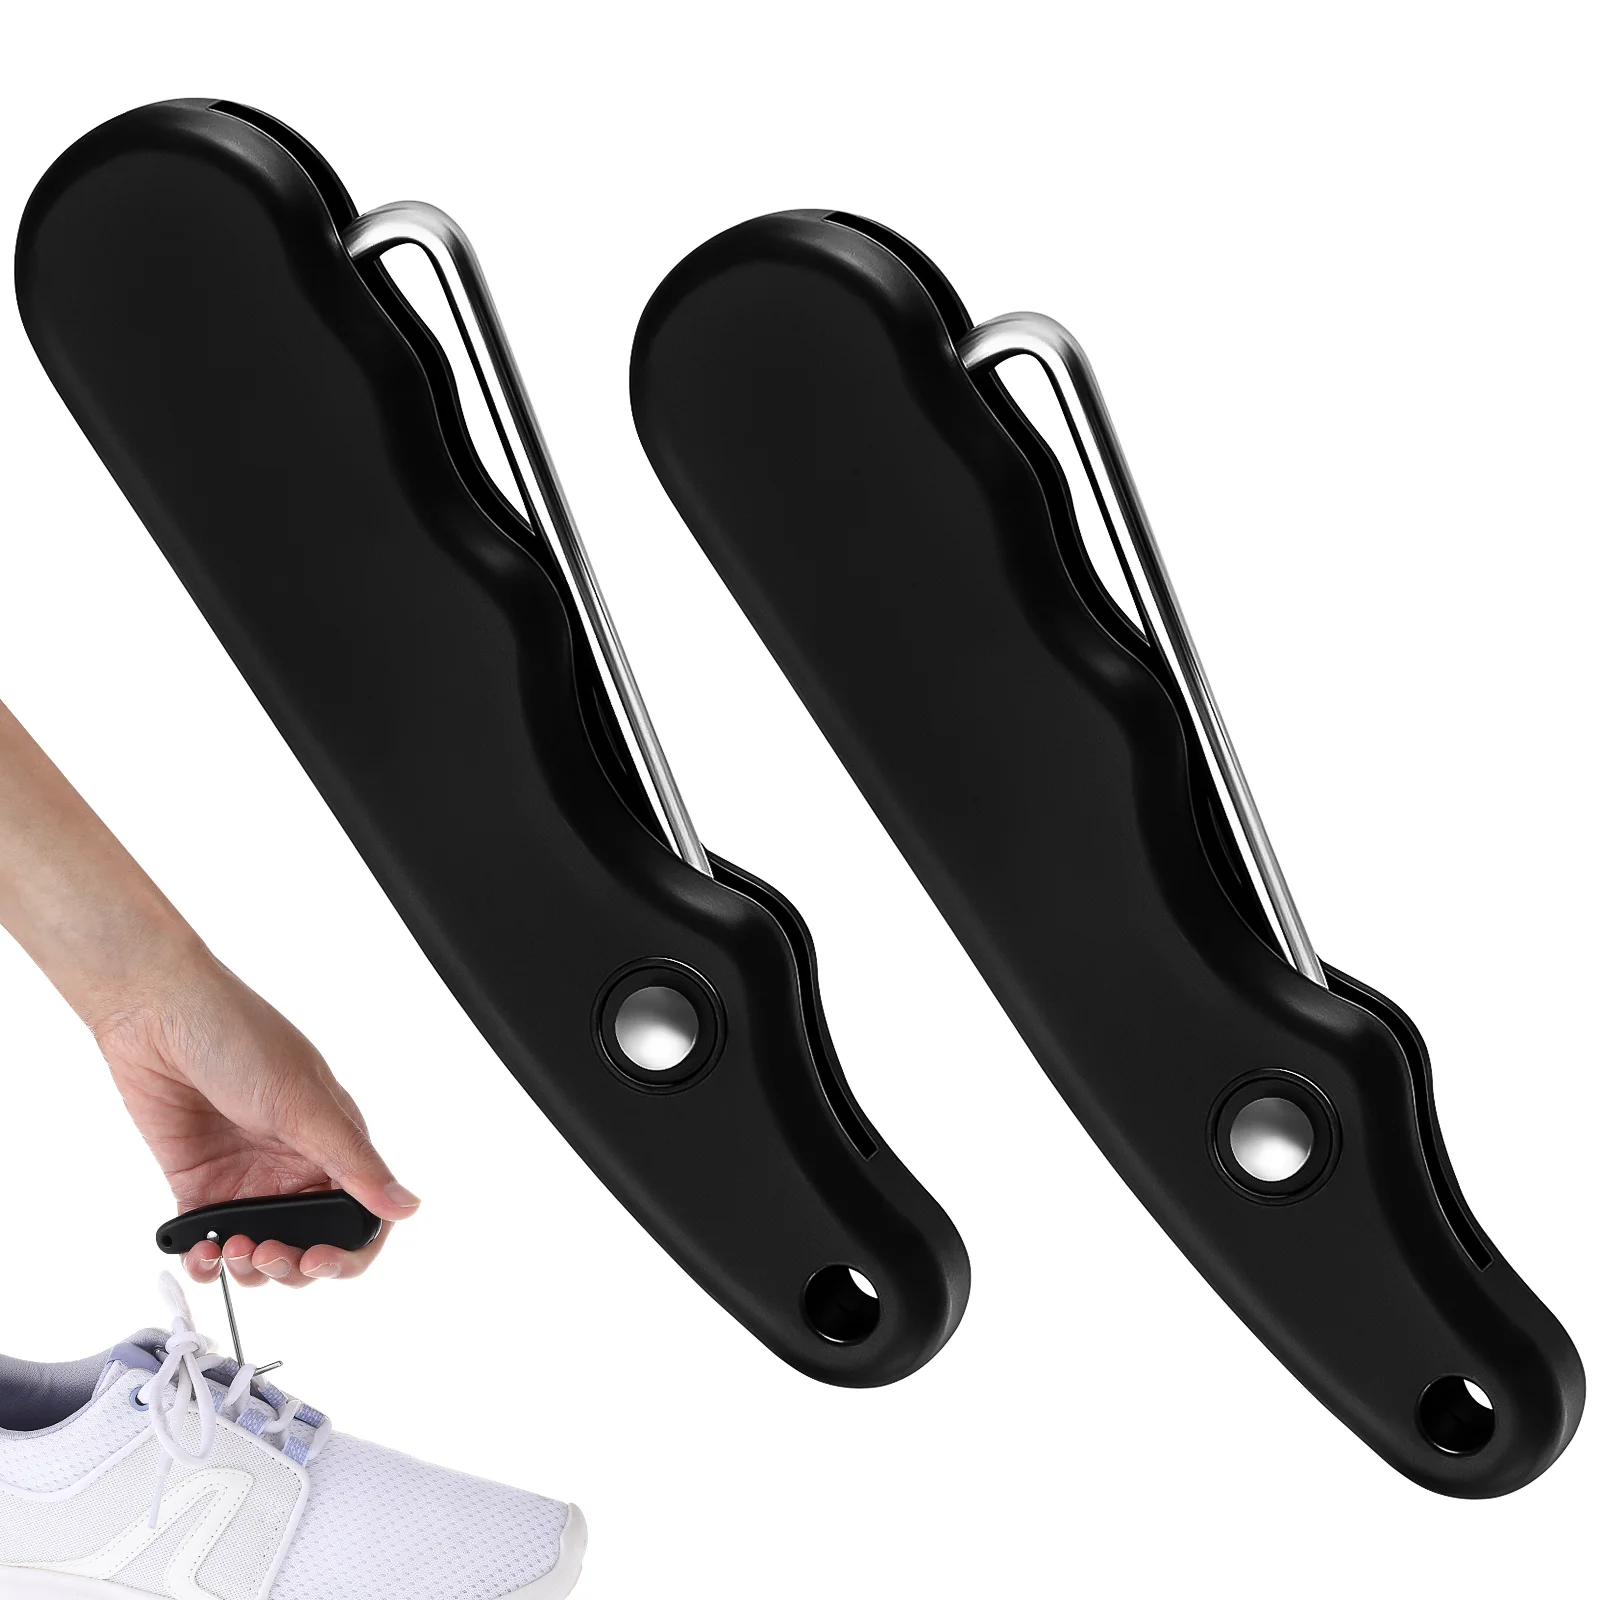 

2 Pcs Shoe Tightener Folding Lace Ice Skate Tool Shoelace Tighteners Shoes Pp Plus Stainless Steel Portable Skating